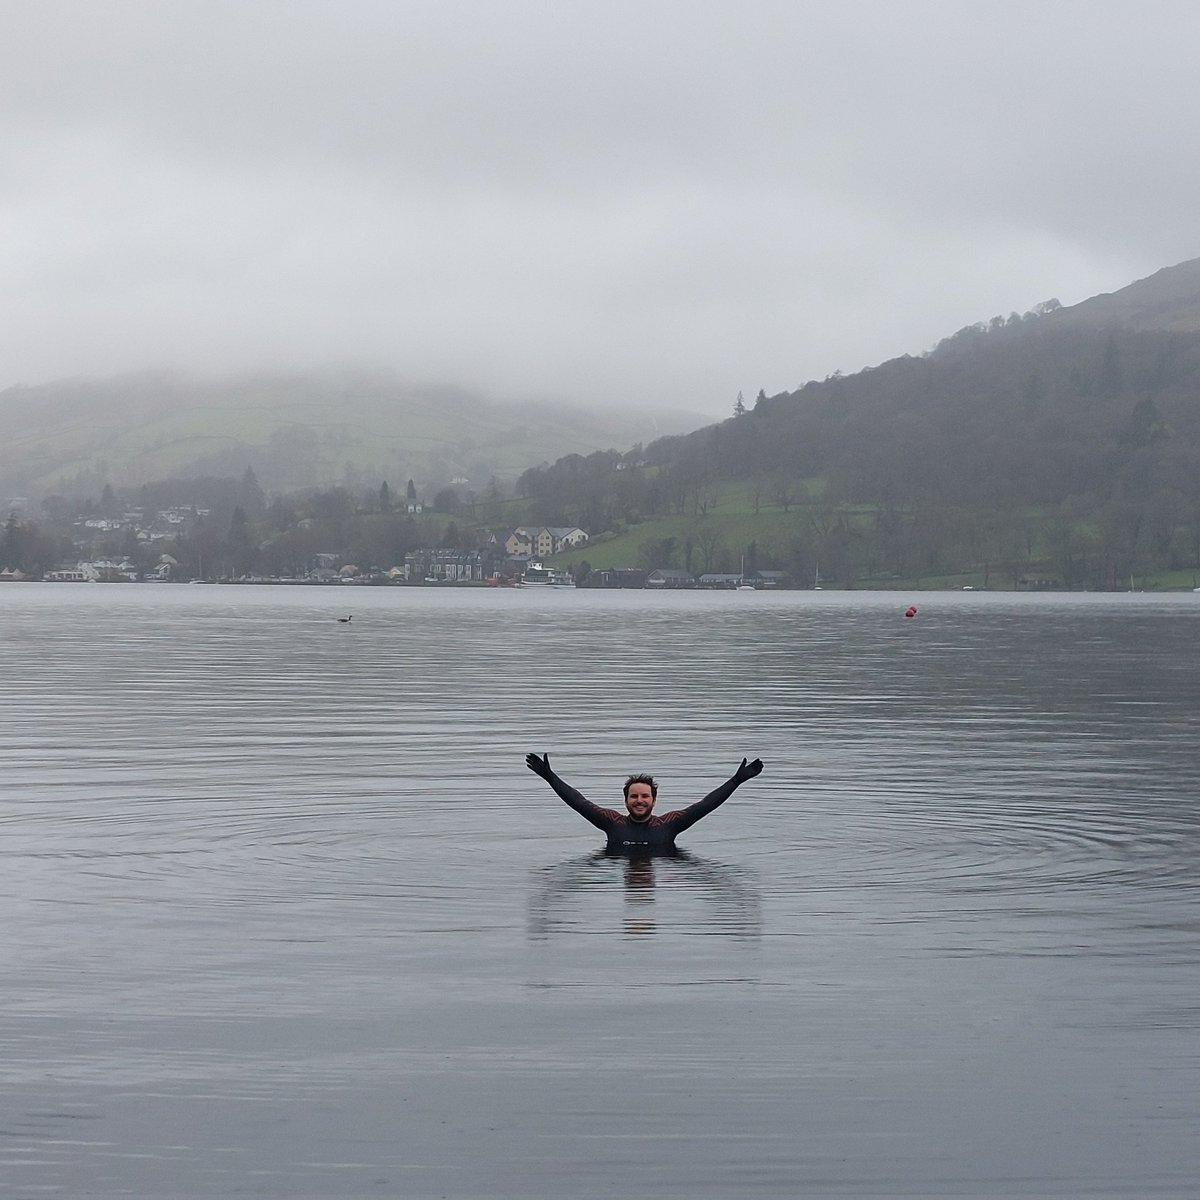 Doing a training swim in #Windermere for my BBC documentary on #DDay. The Commandos who trained for the real mission had a lot to worry about, but swimming in sewage polluted waters wasn't one of them! We need to protect the #LakeDistrict & all our waters from #pollution.